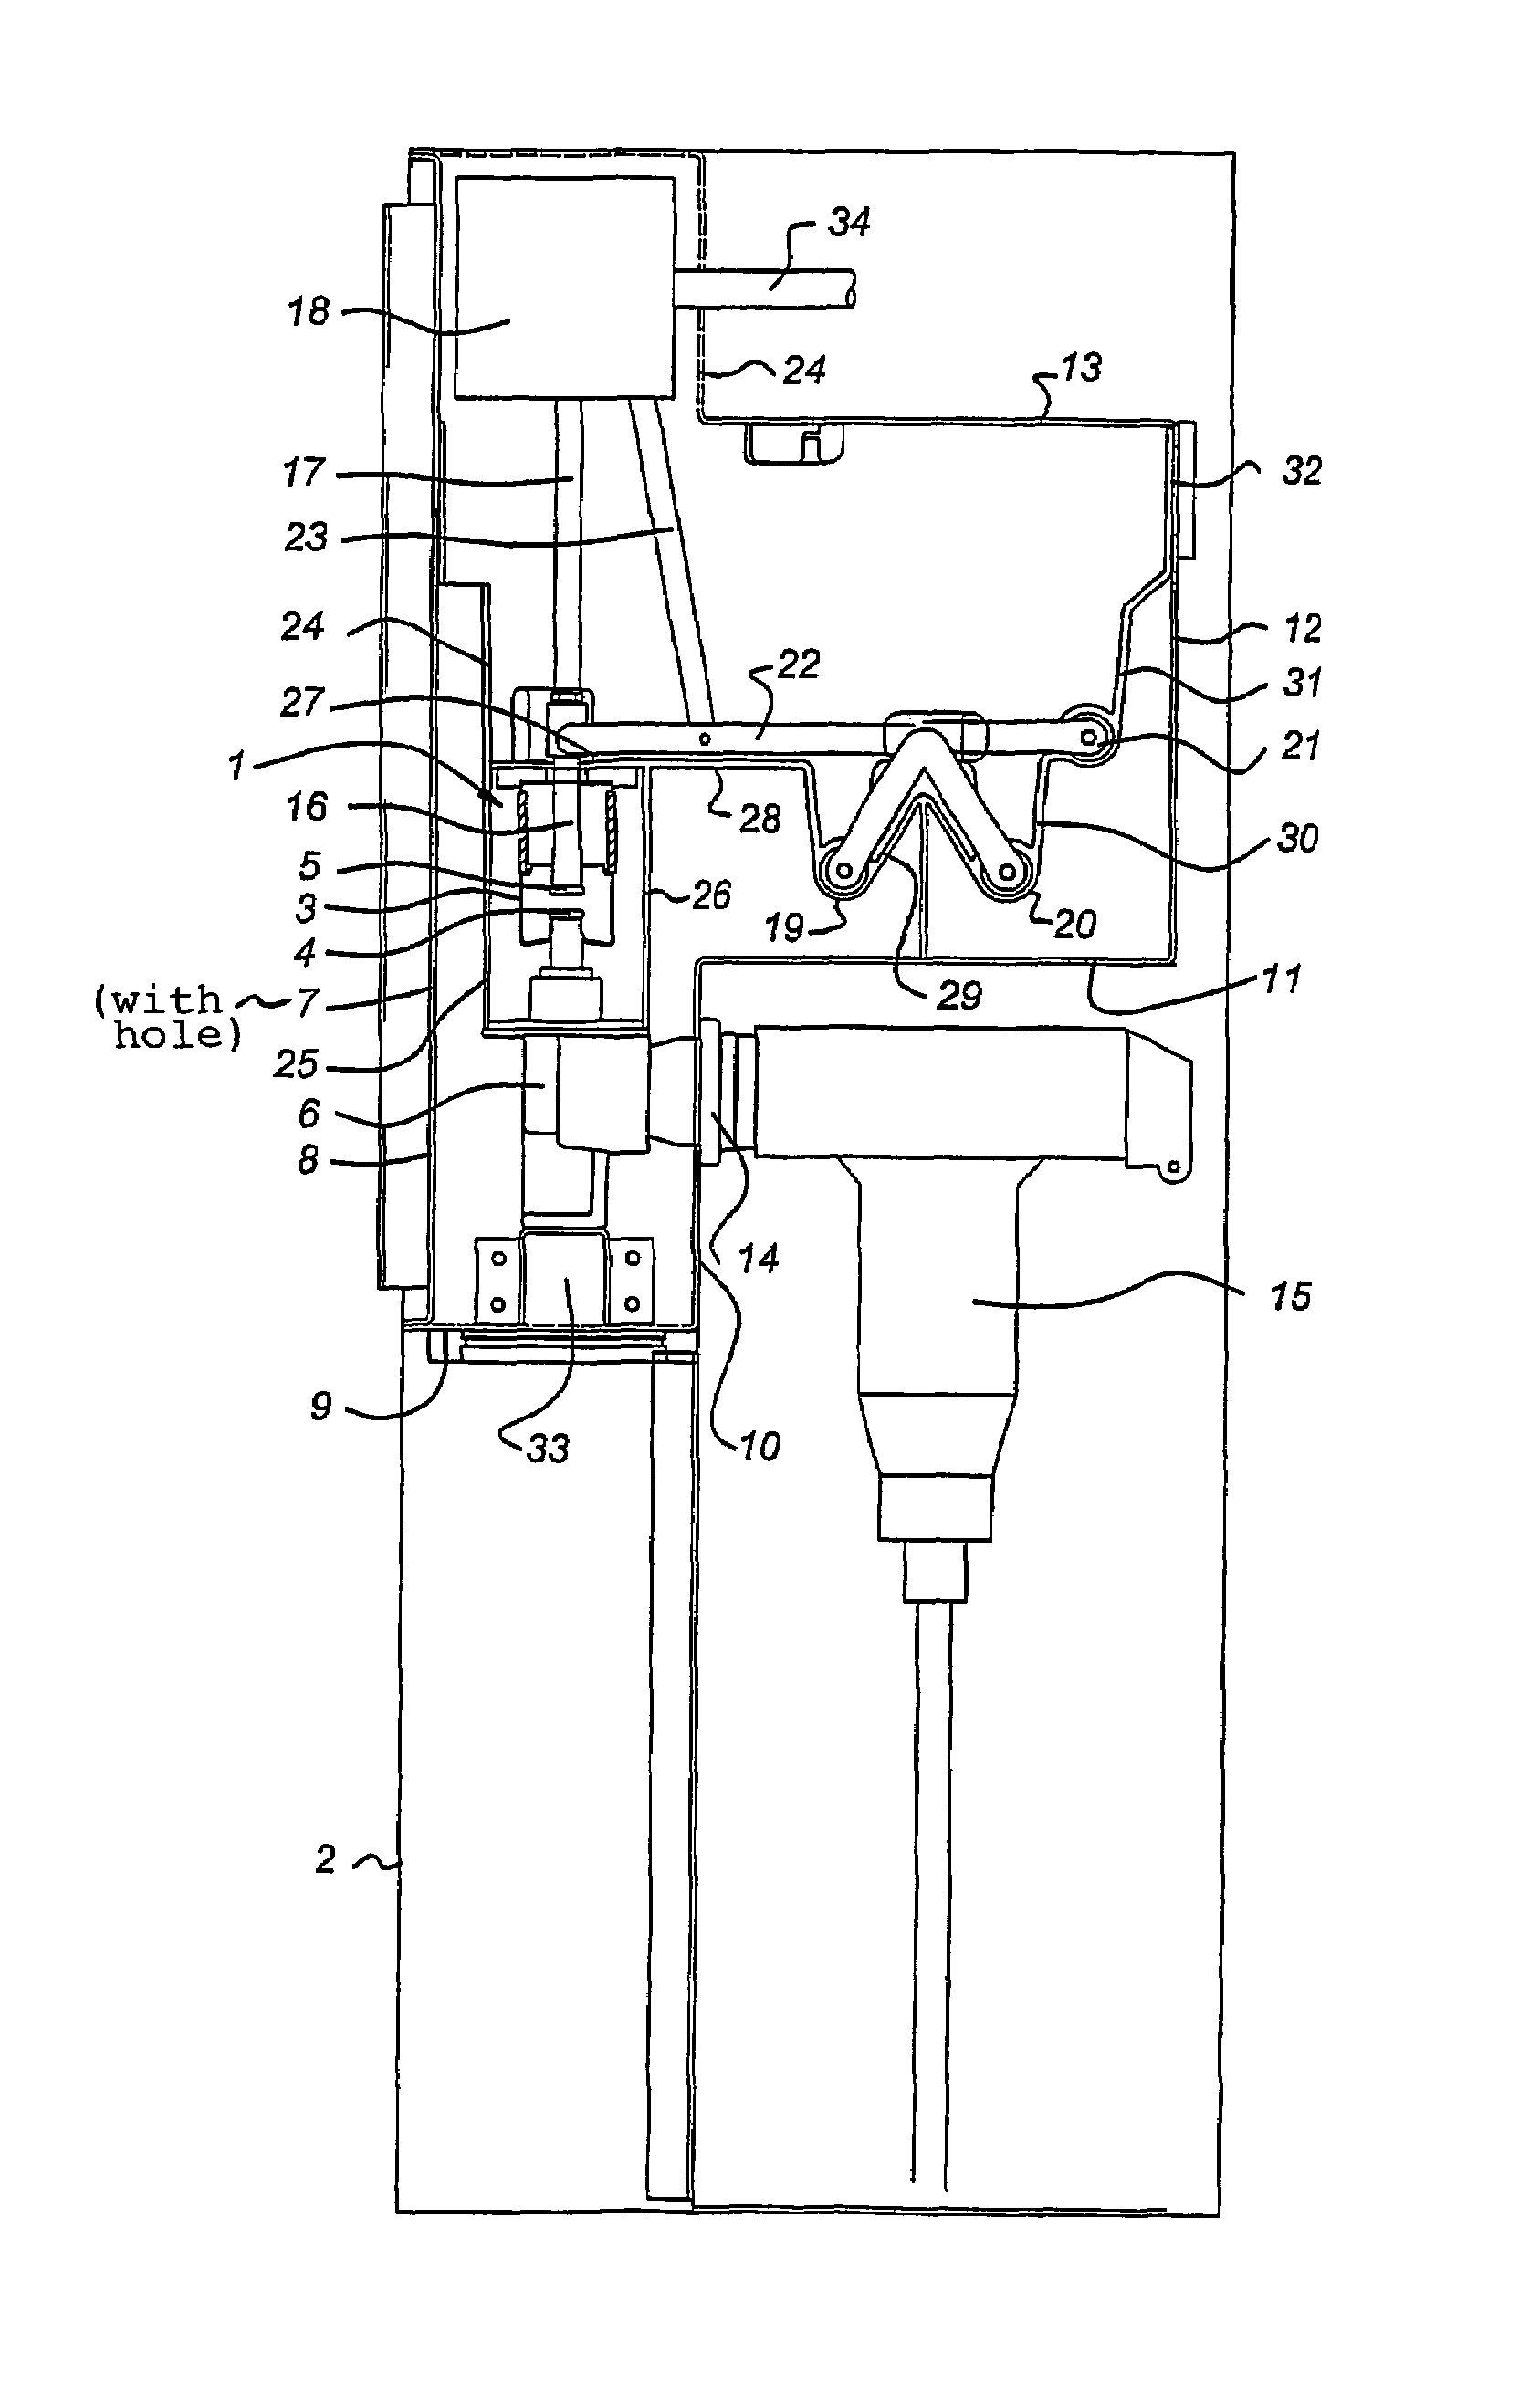 Single phase or polyphase switchgear in an enveloping housing